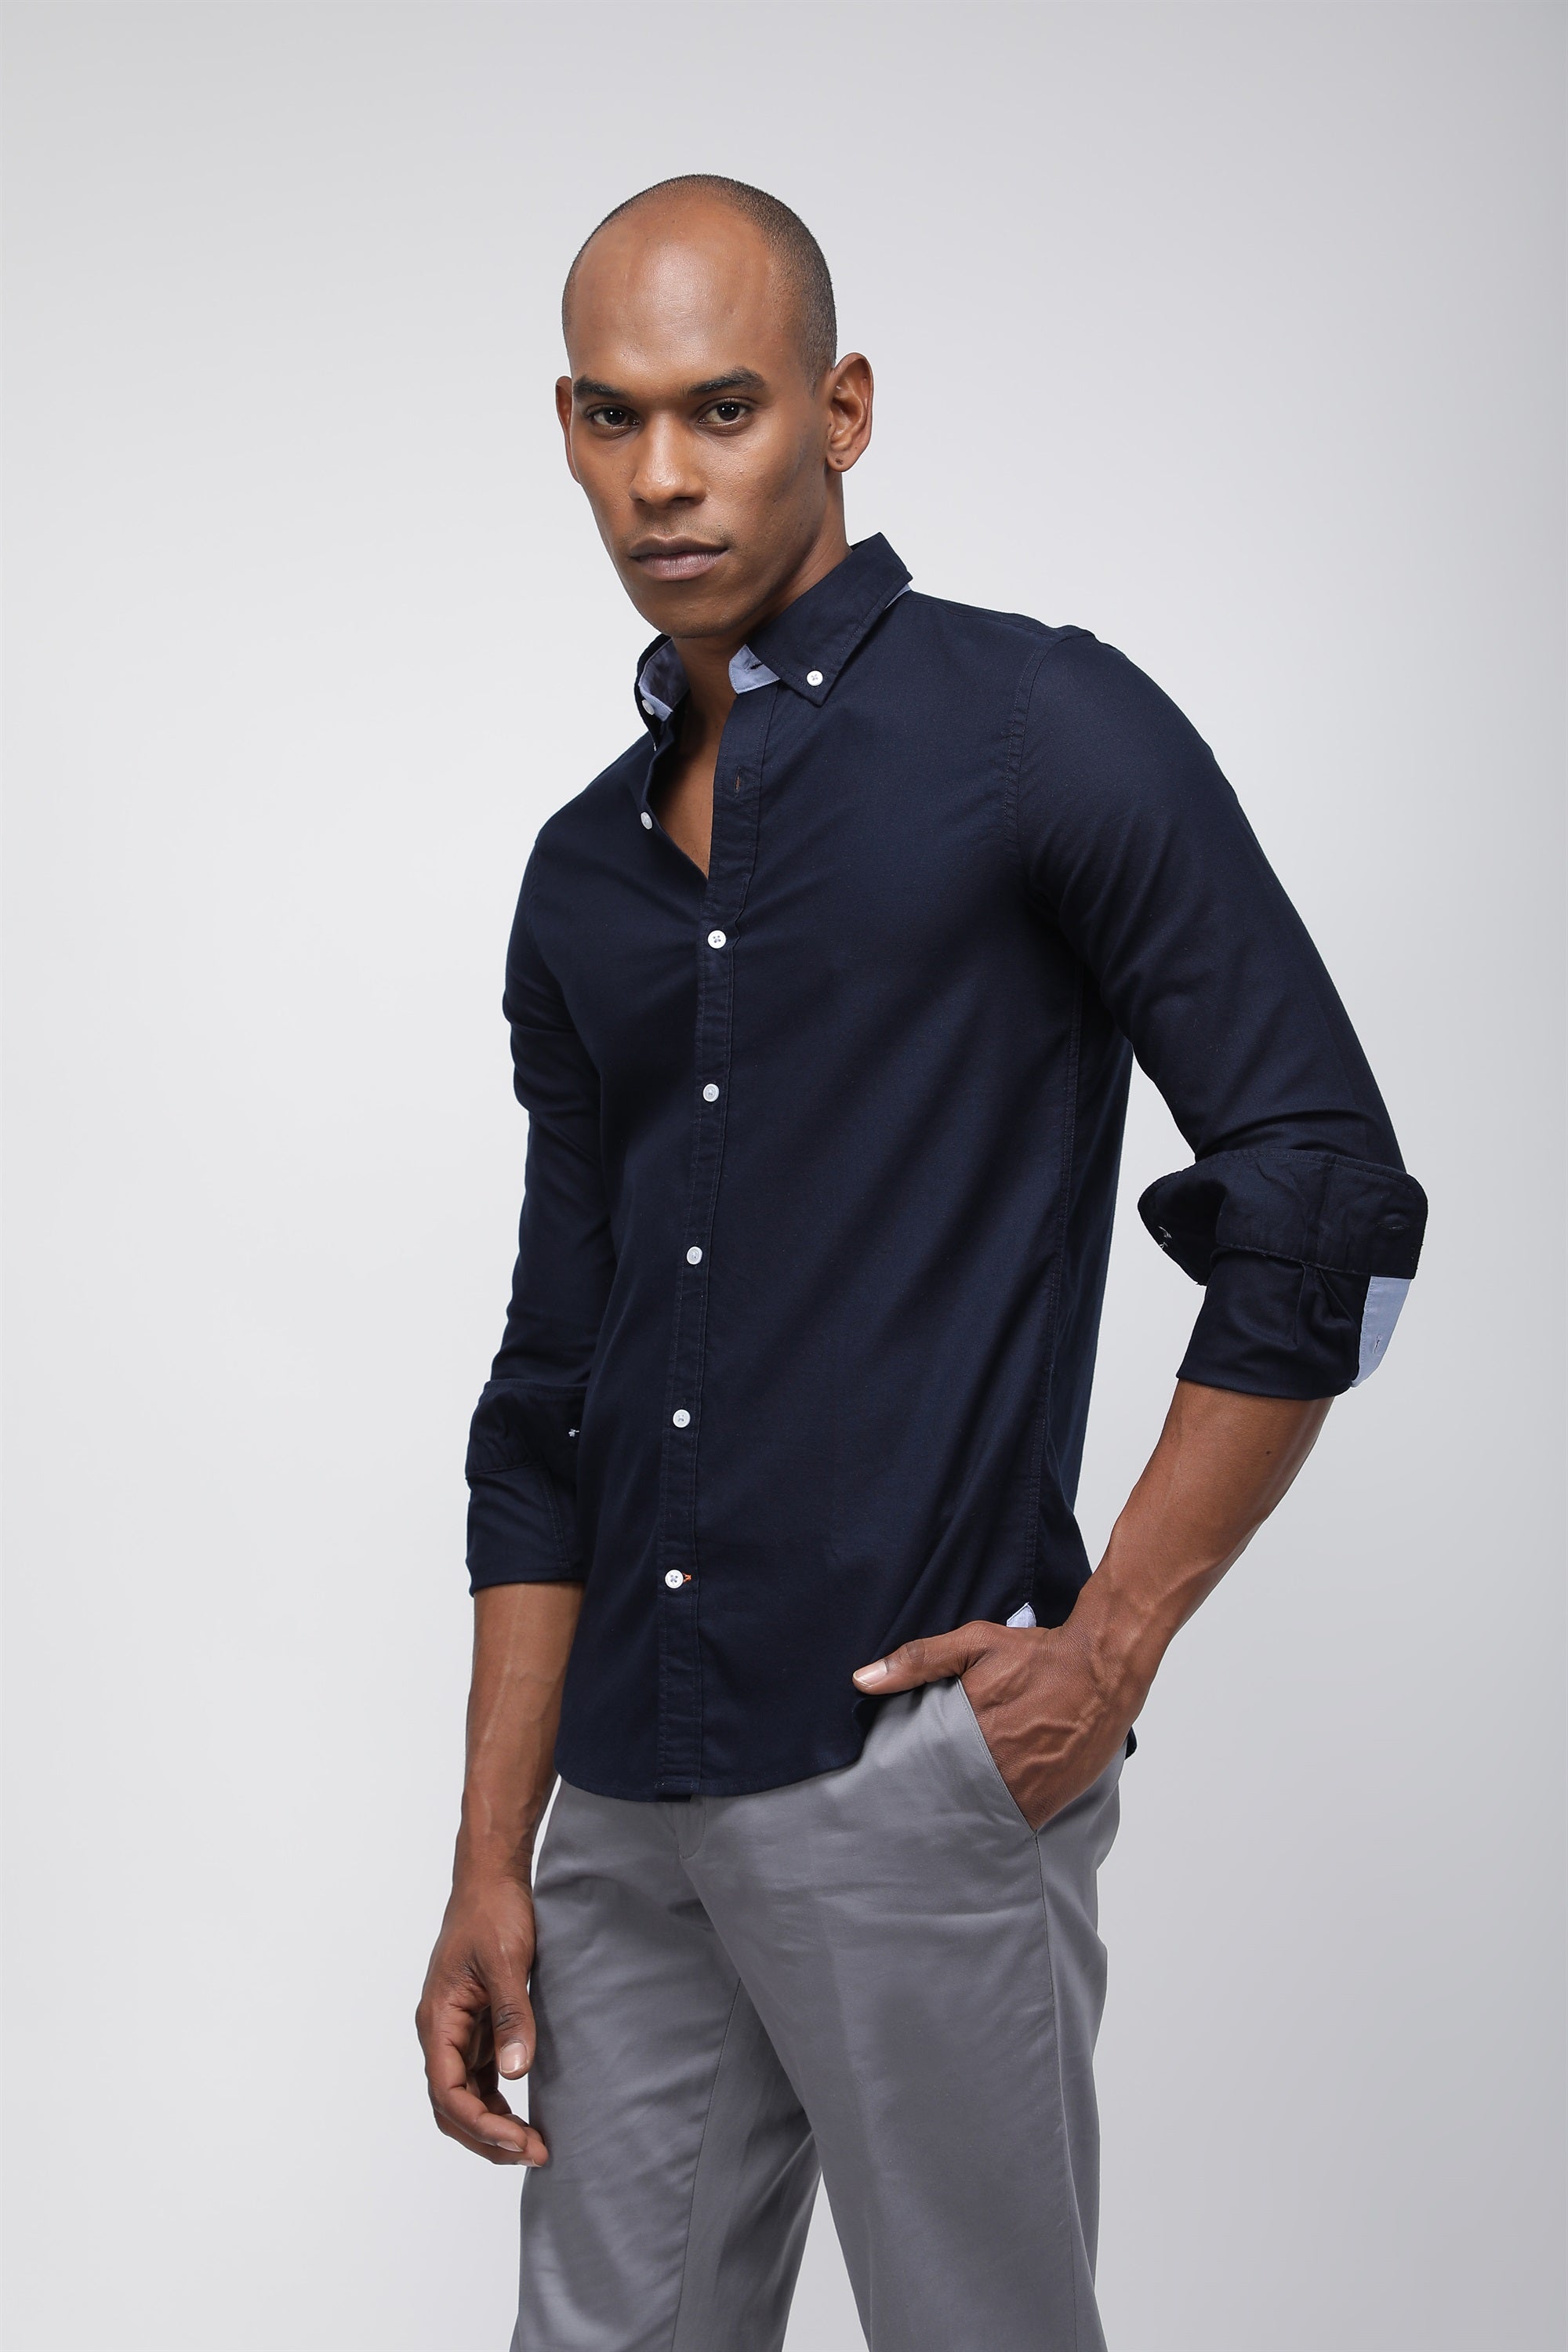 Bare Brown Solid Cotton Oxford Stretch Shirt, Slim Fit with Full Sleeves - Navy